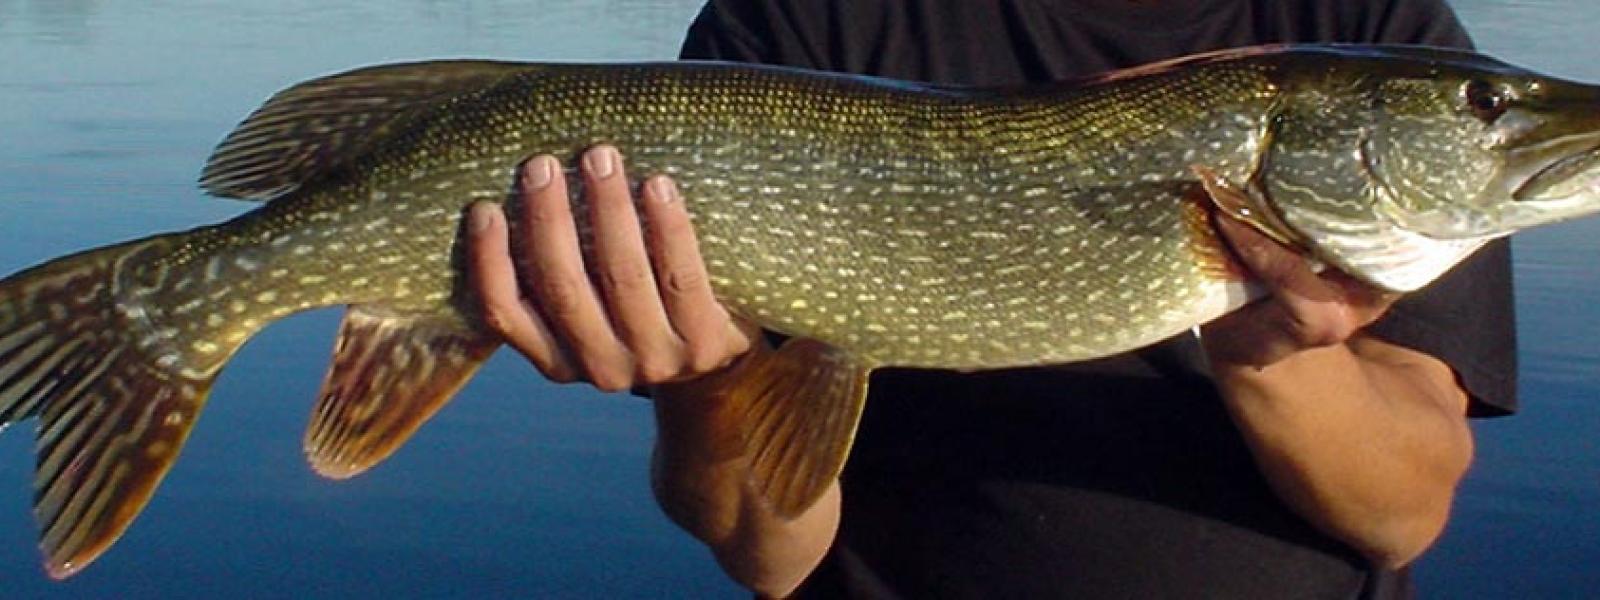 Large Northern pike being held in two hands